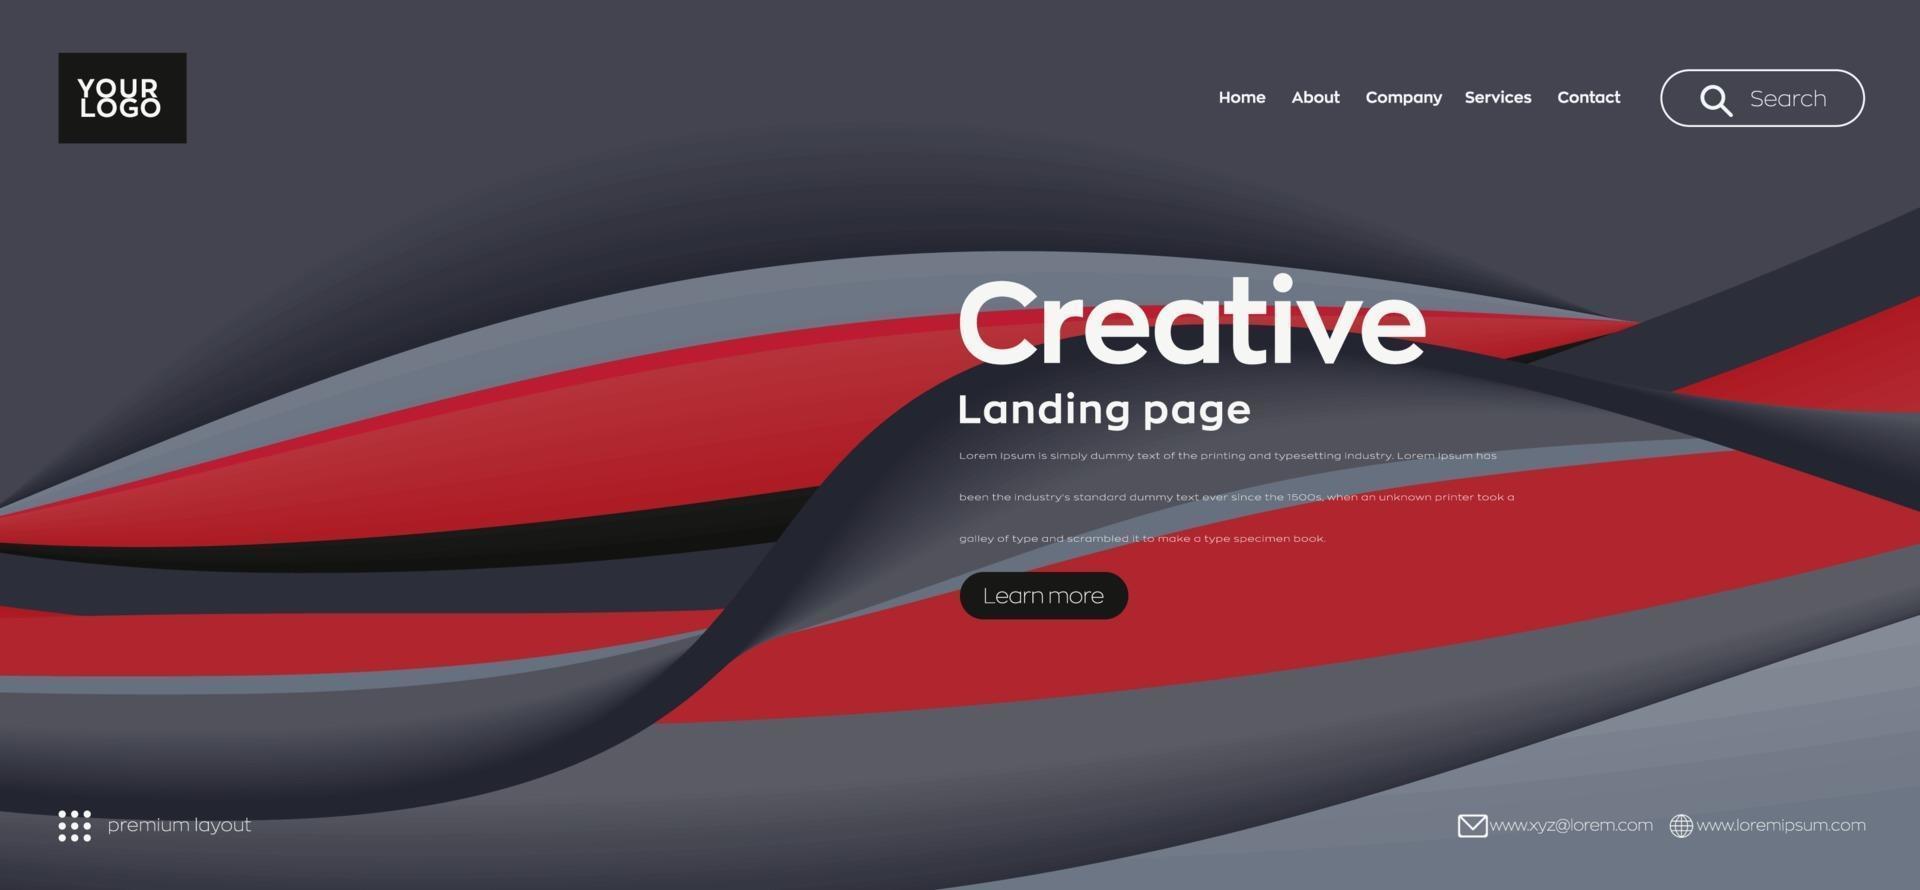 Landing page. Abstract colorful background design vector